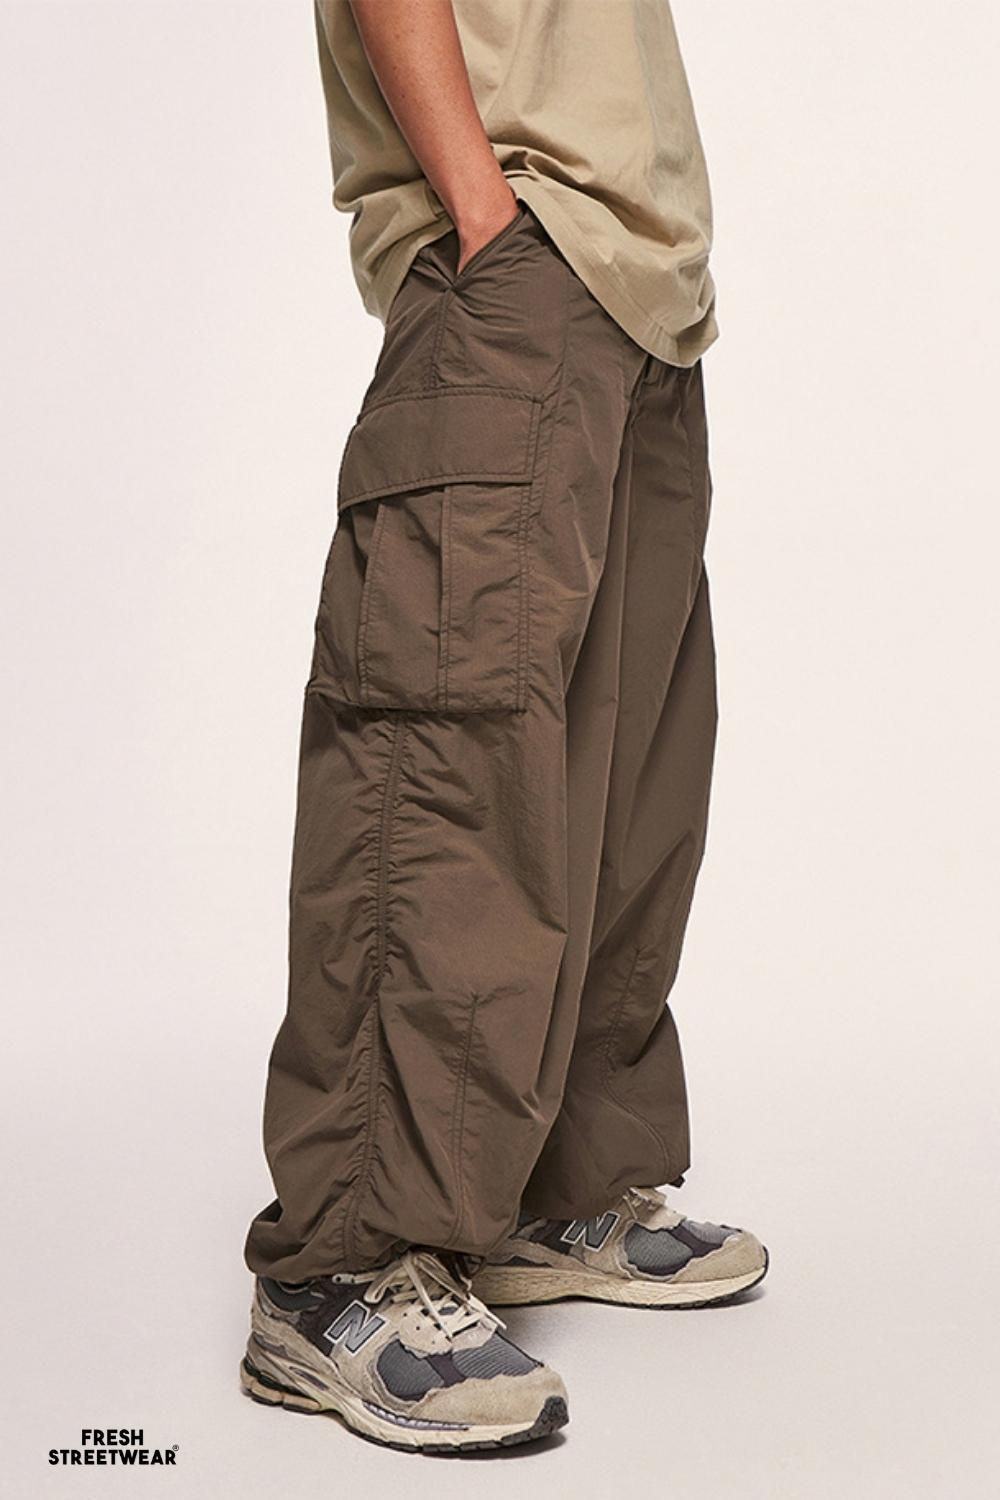 Add stylish mens cargo pants to your fashion collection